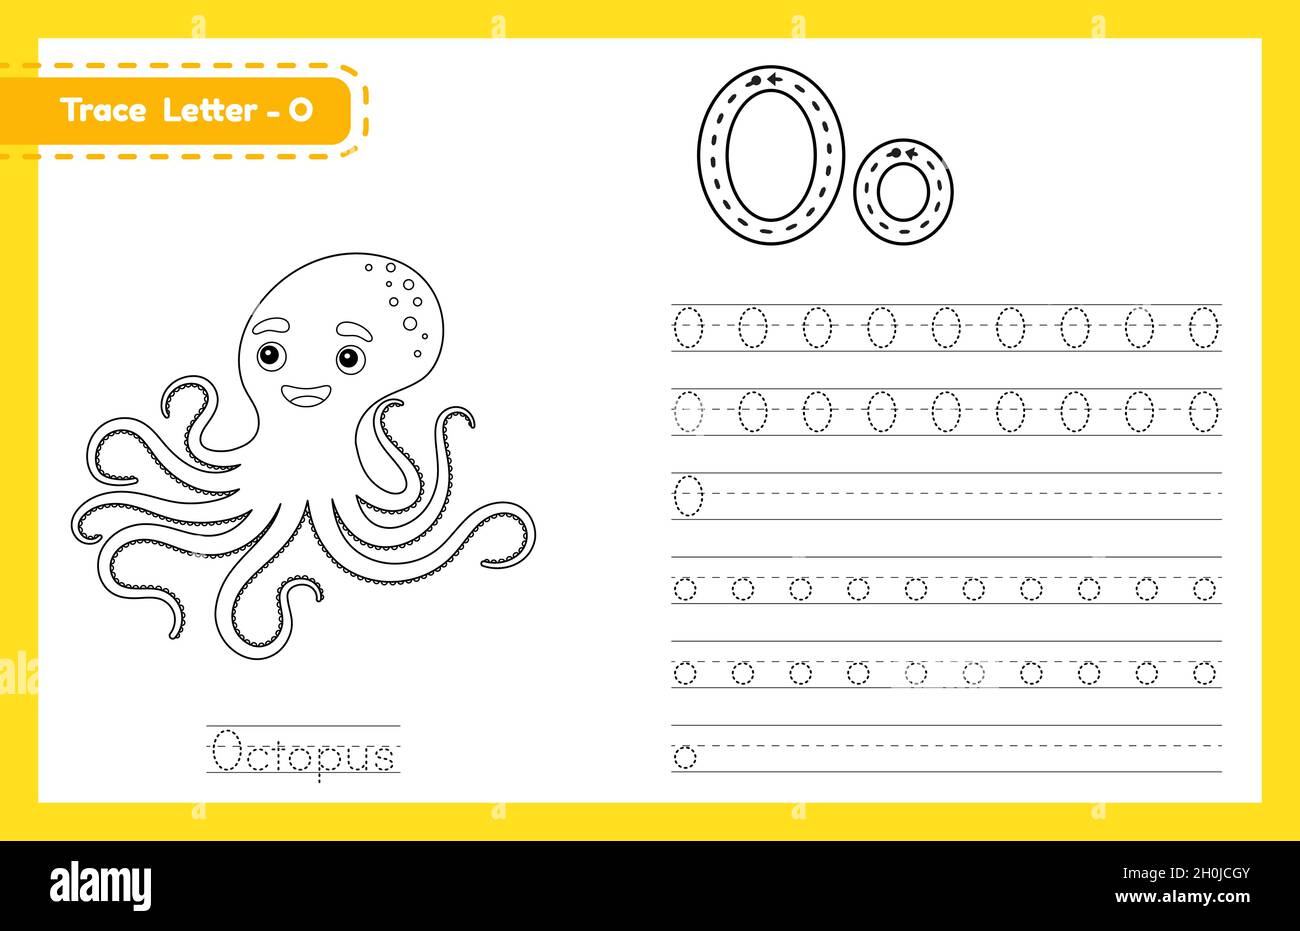 Trace letter o uppercase and lowercase alphabet tracing practice preschool worksheet for kids learning english with cute cartoon animal coloring boo stock vector image art